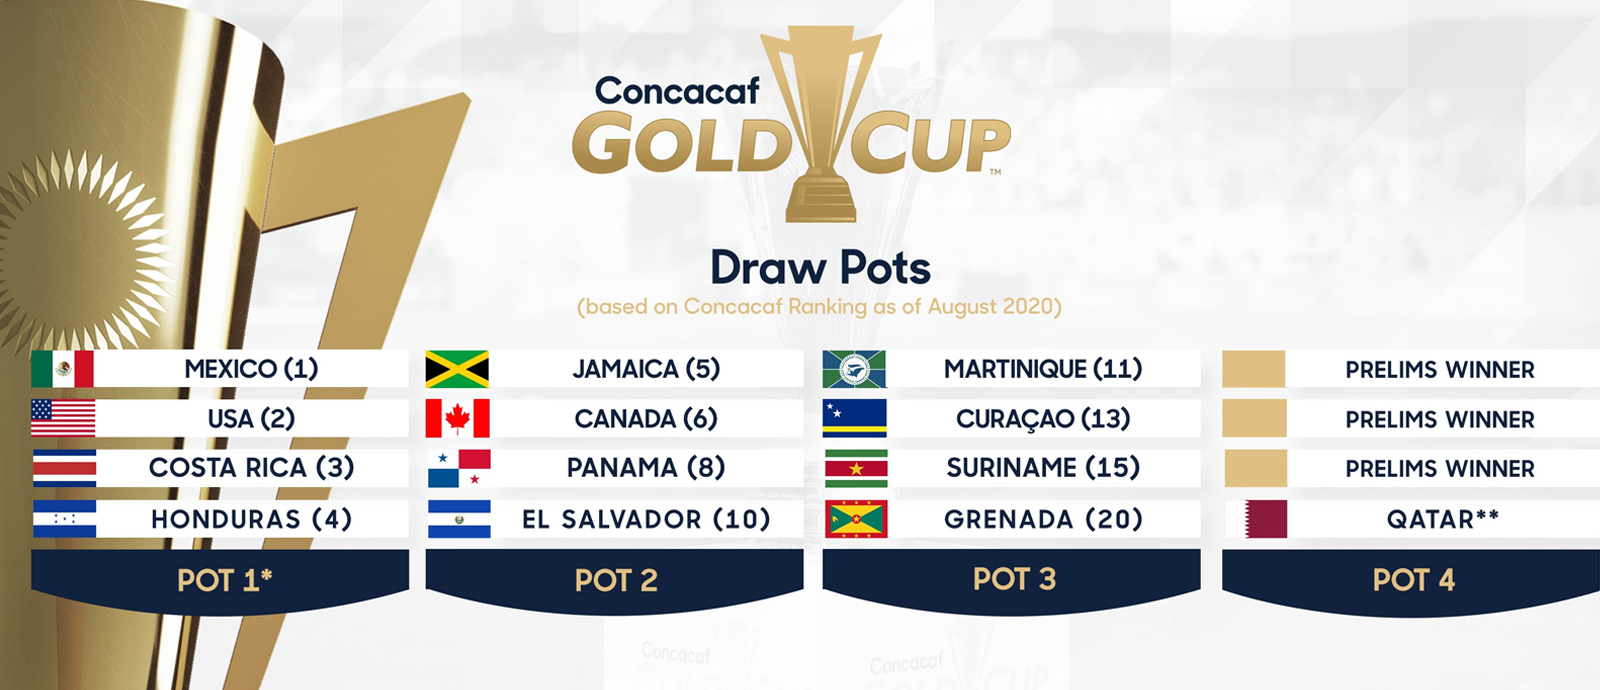 Group D in 2021 Gold Cup